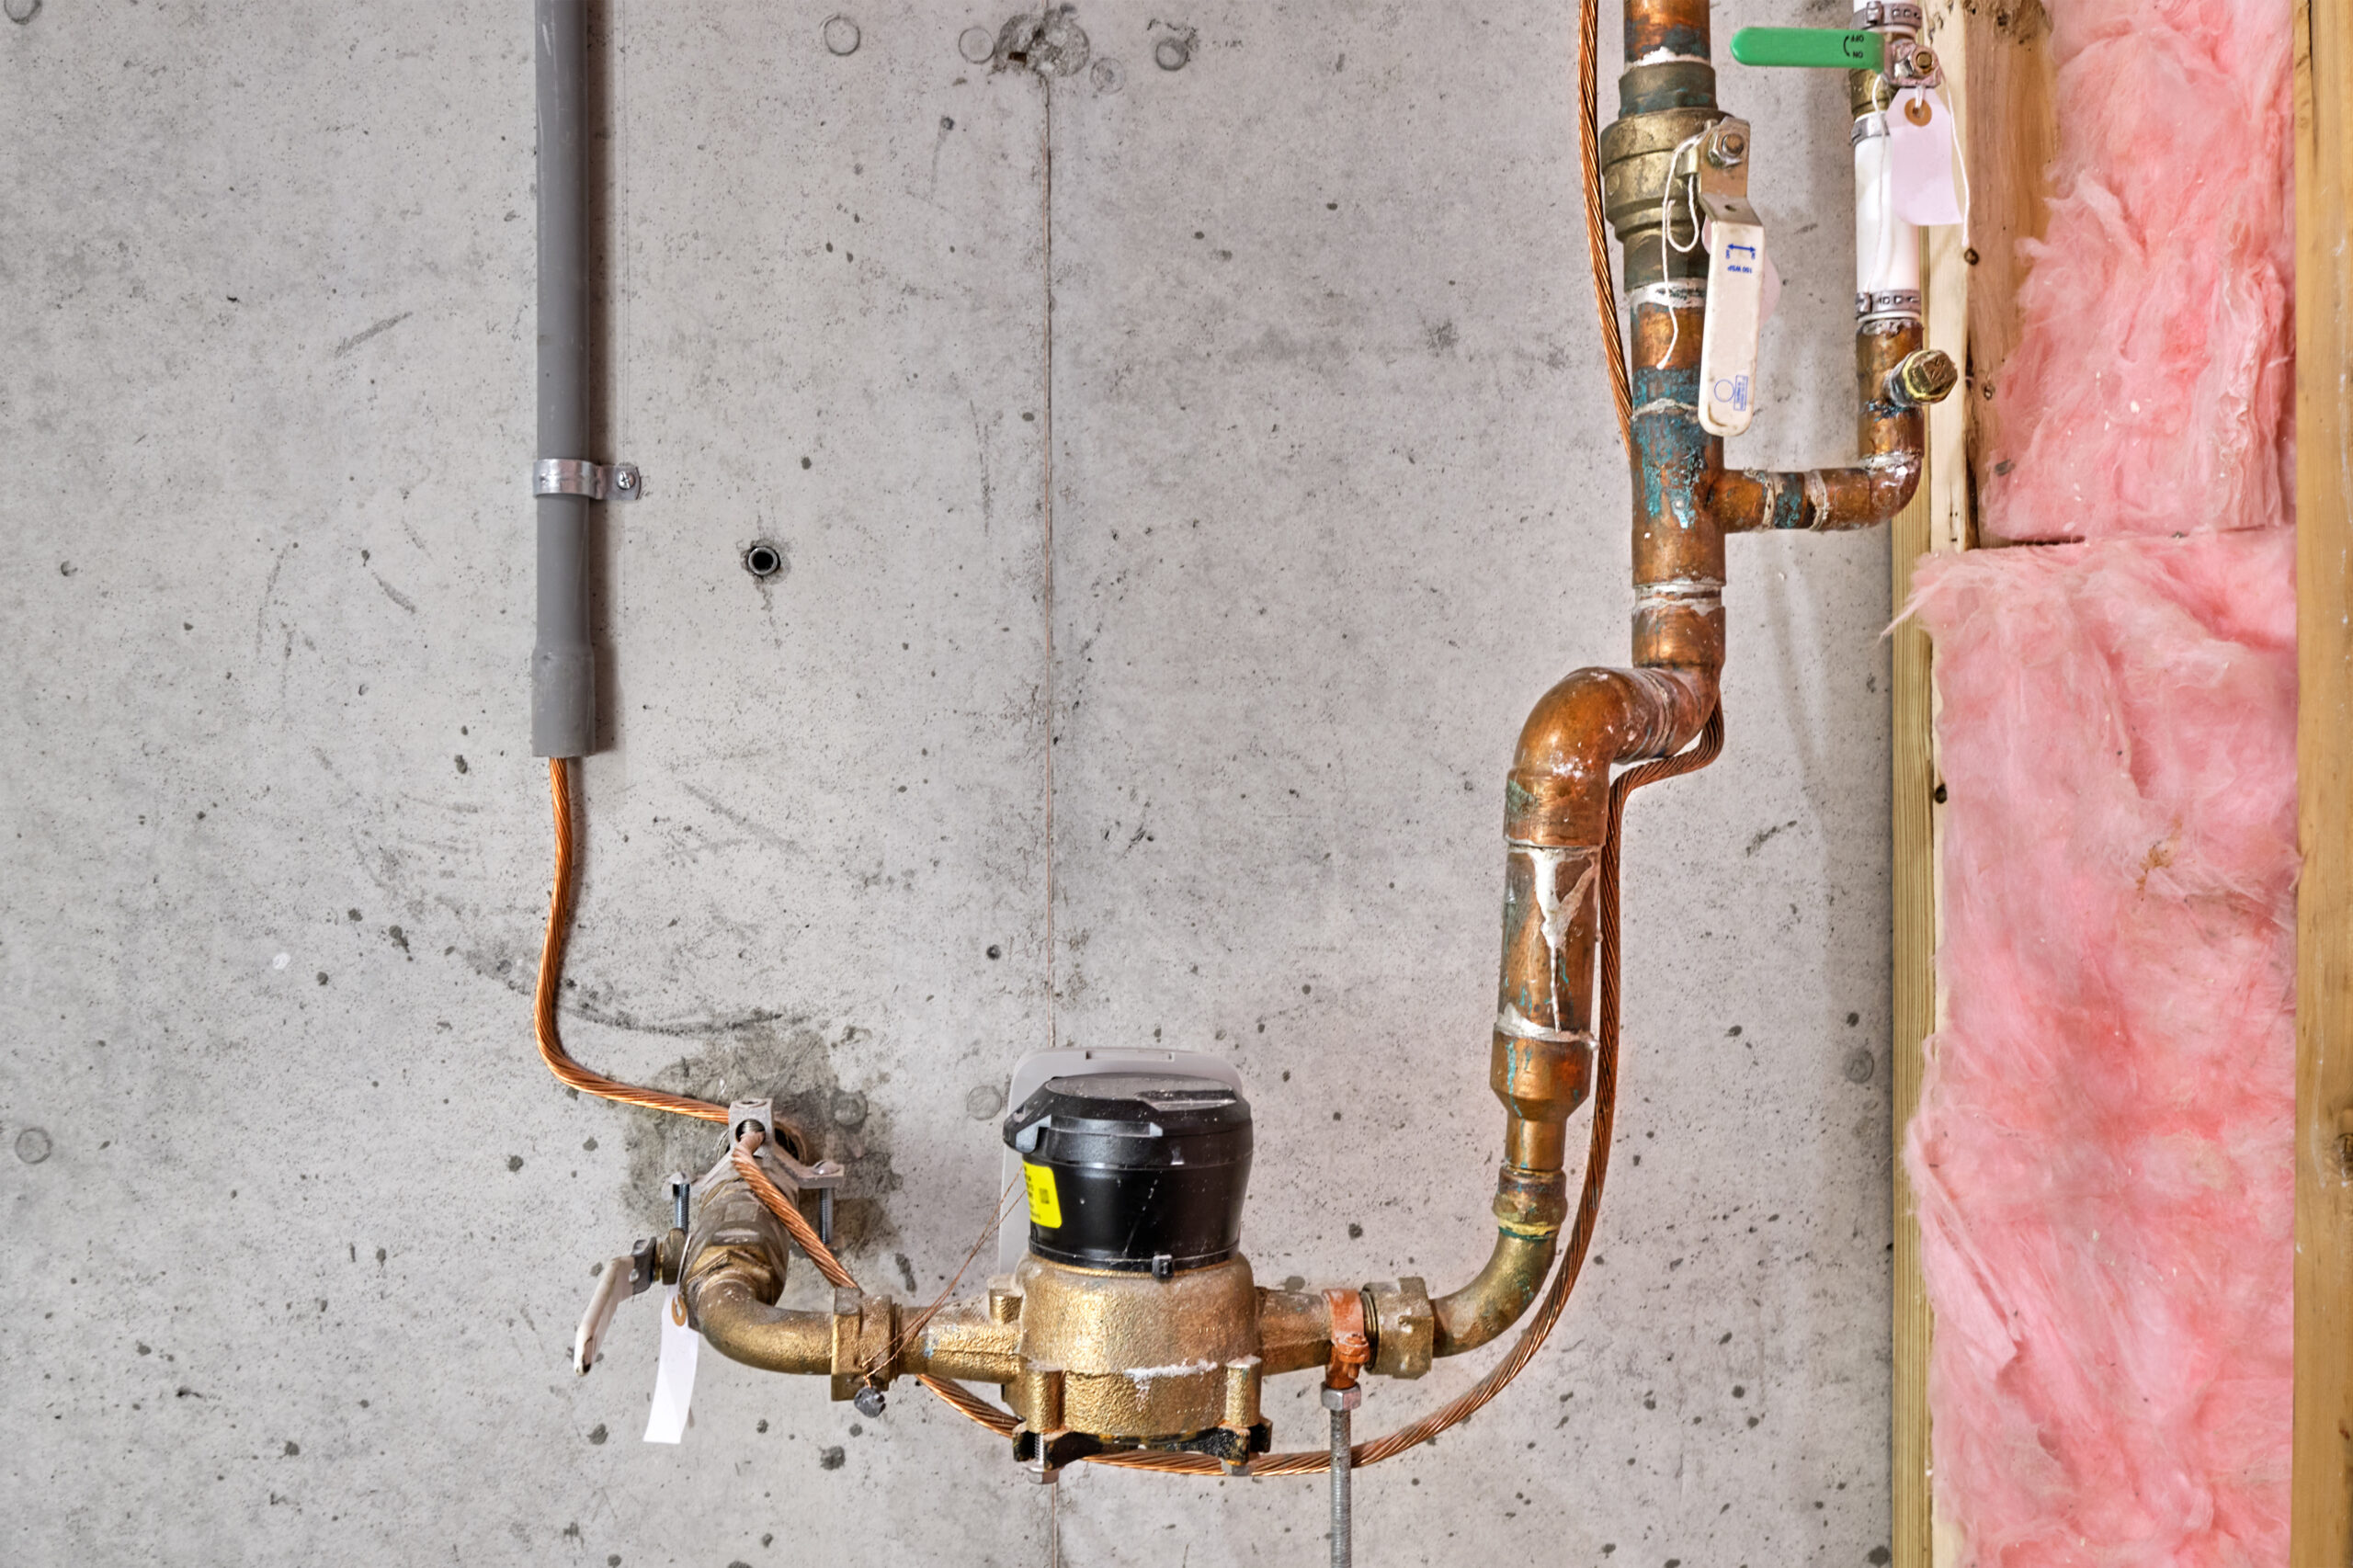 Should you Invest in a Smart Home Water Shutoff System for the New Year?